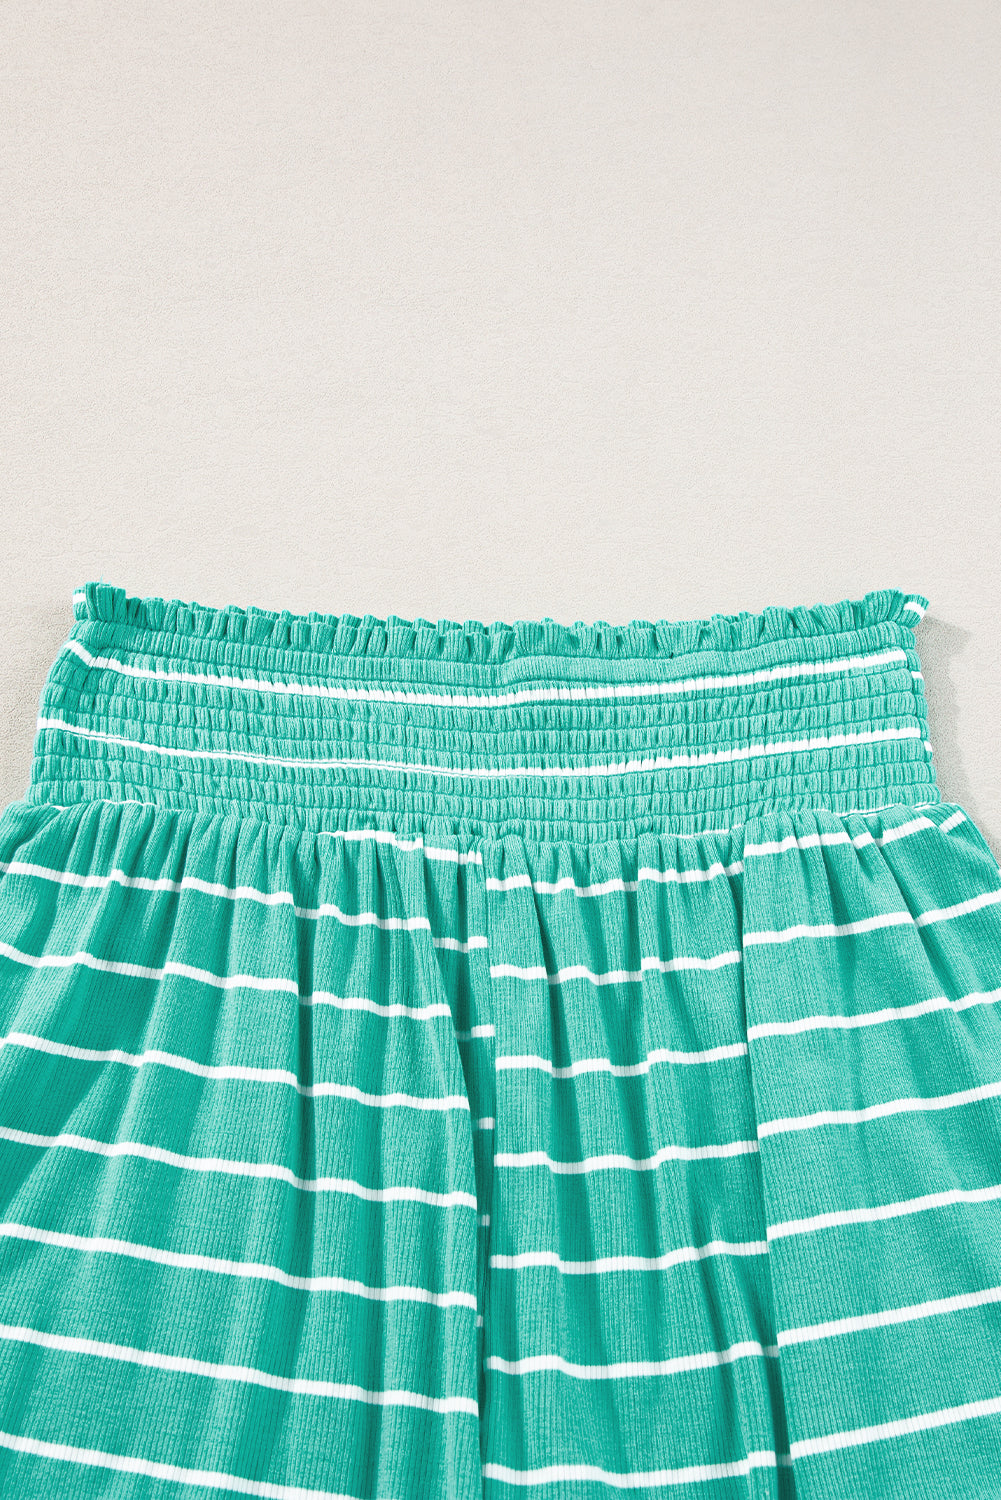 Green Stripe U Neck Crop Cami Top and Shorts Outfit